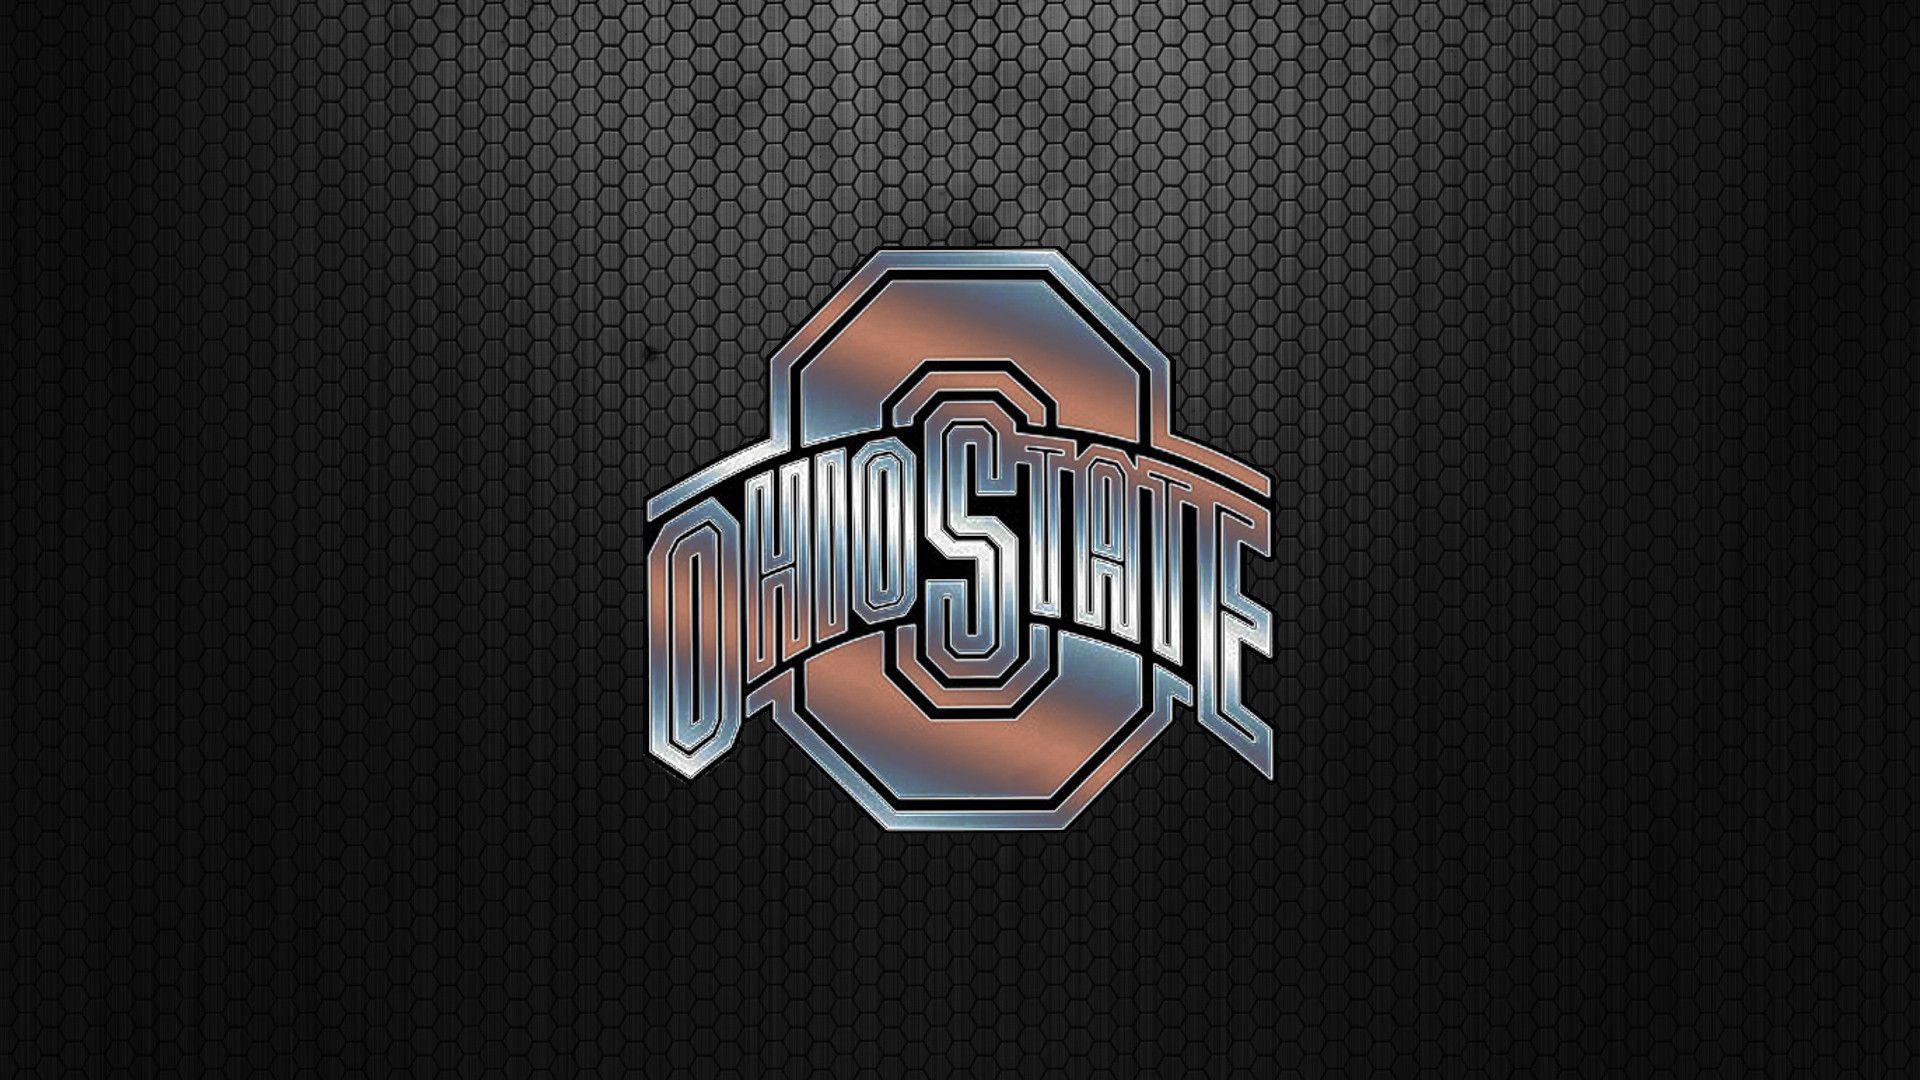 Football Osu Ohio State Fanpop Download Mobile Wallpapers Download